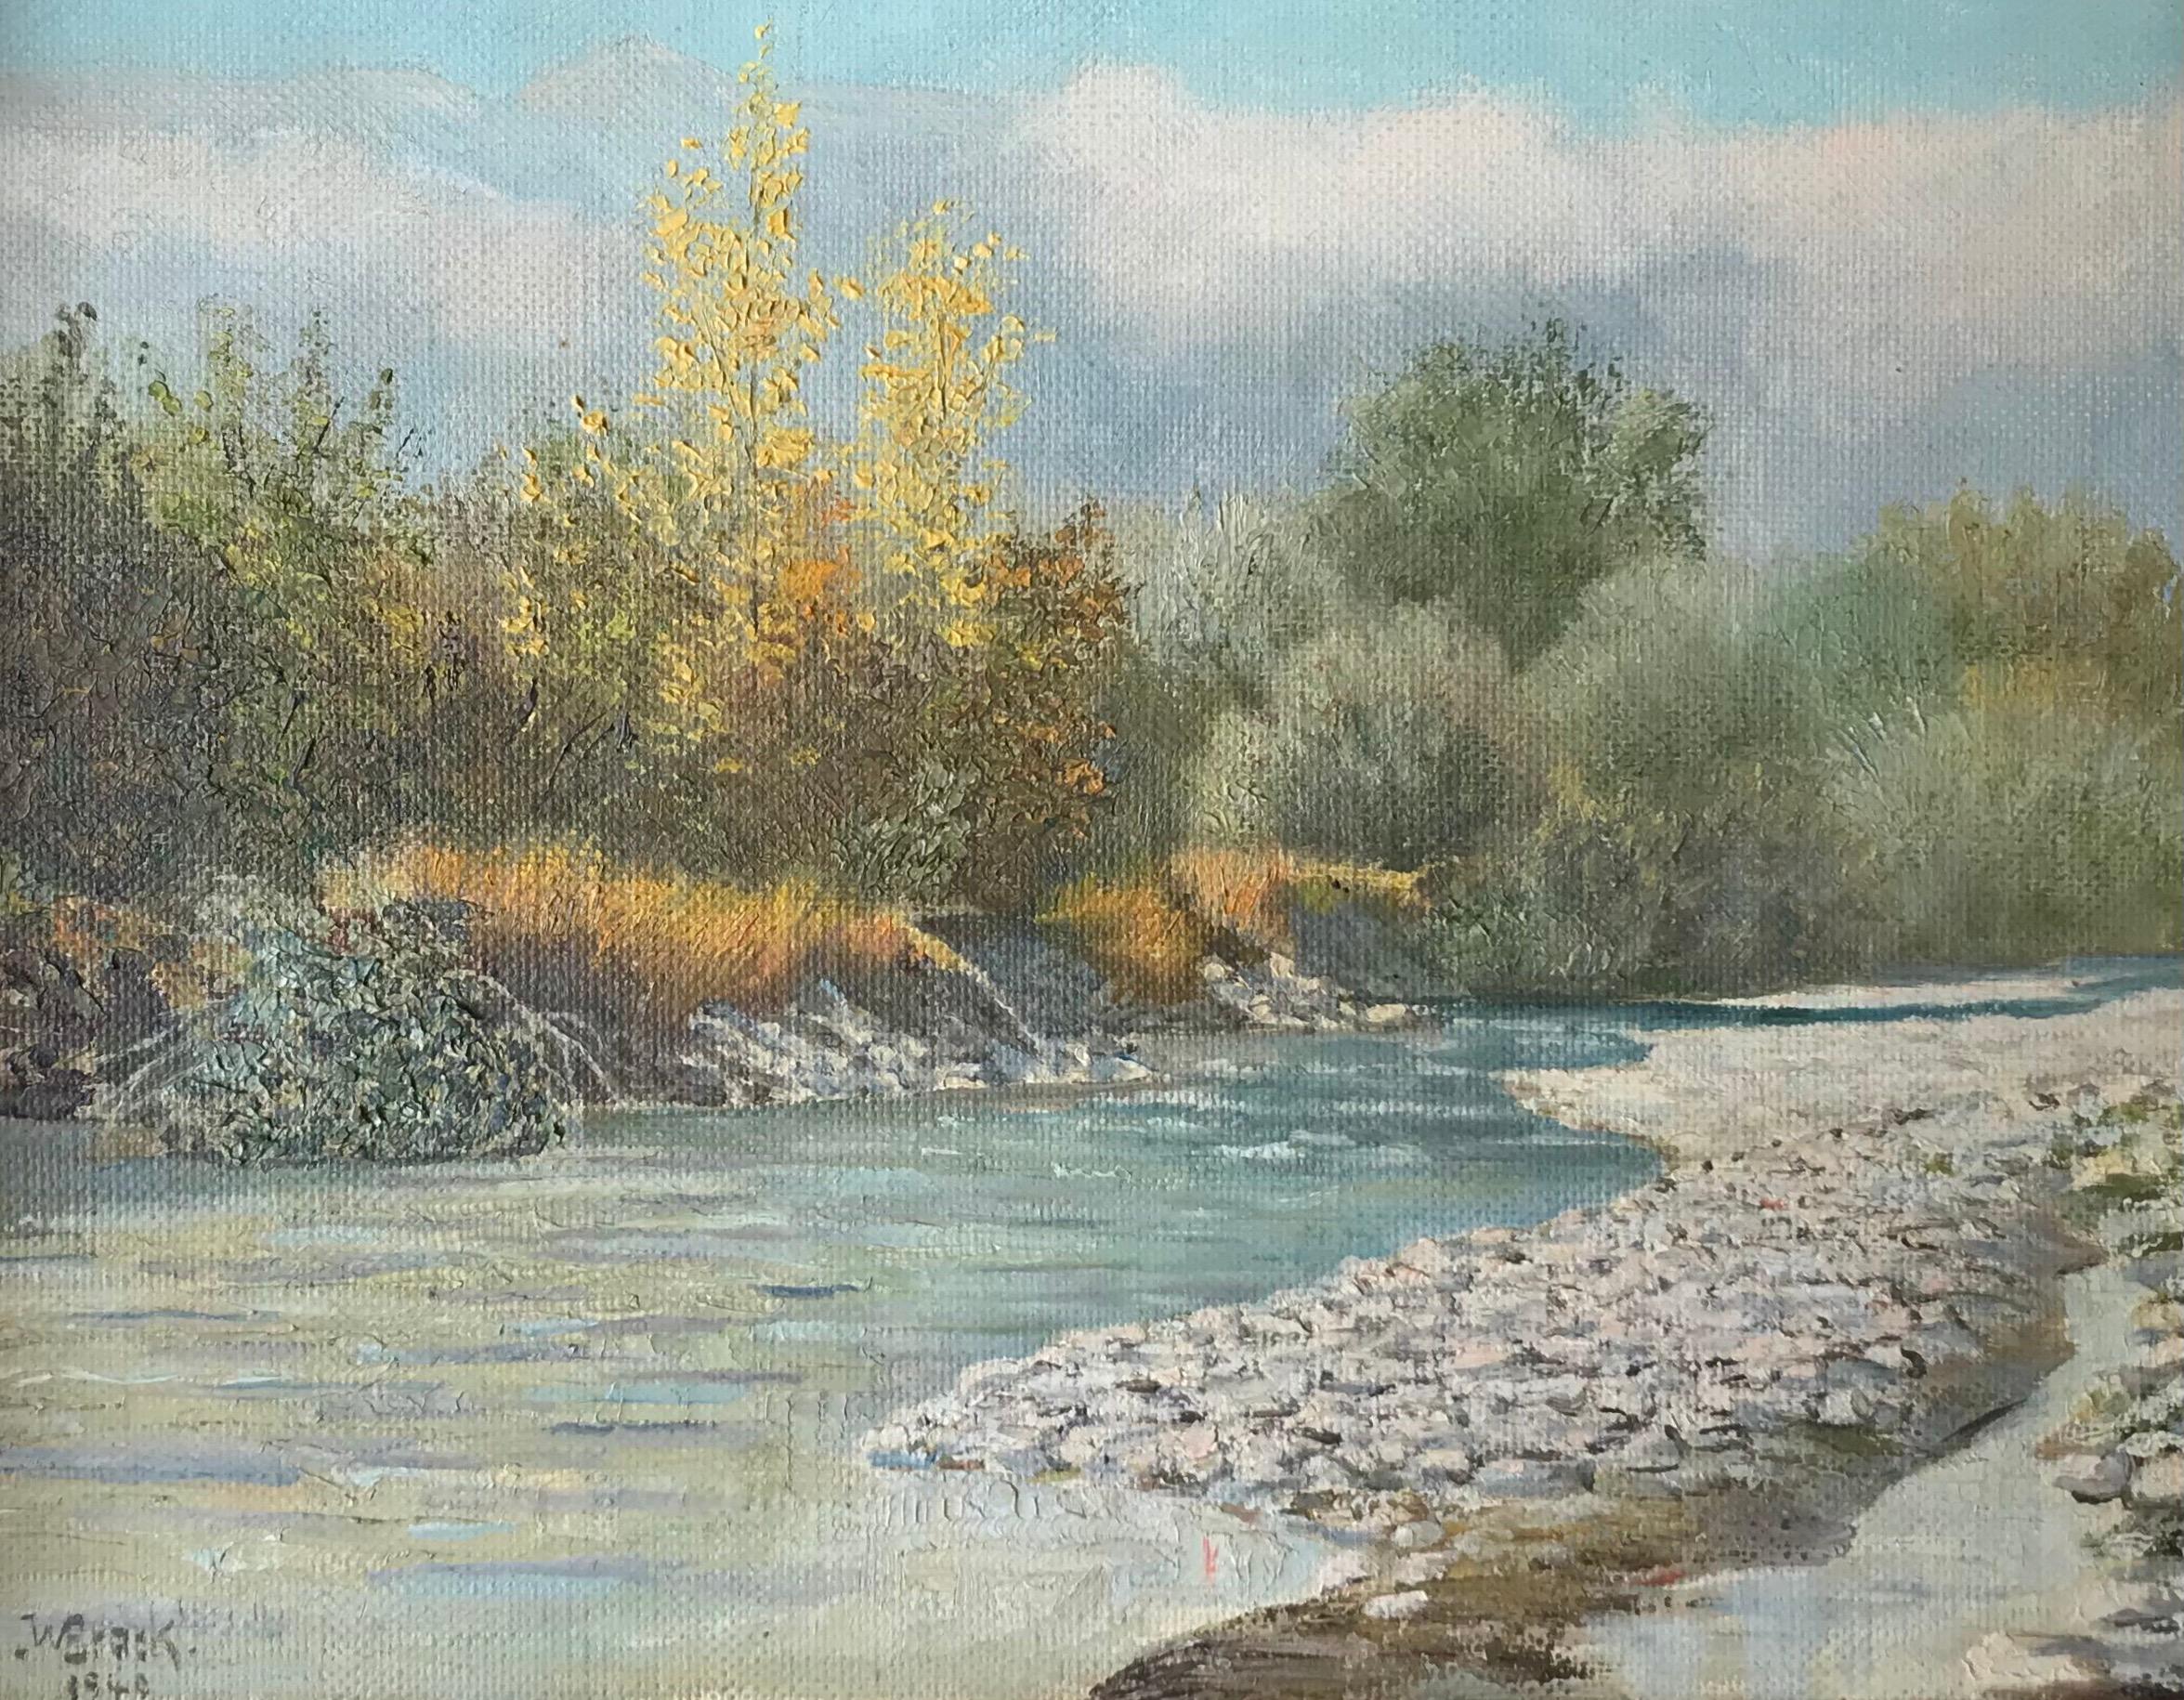 River bank by William Paul Brack - Oil on canvas 27x35 cm